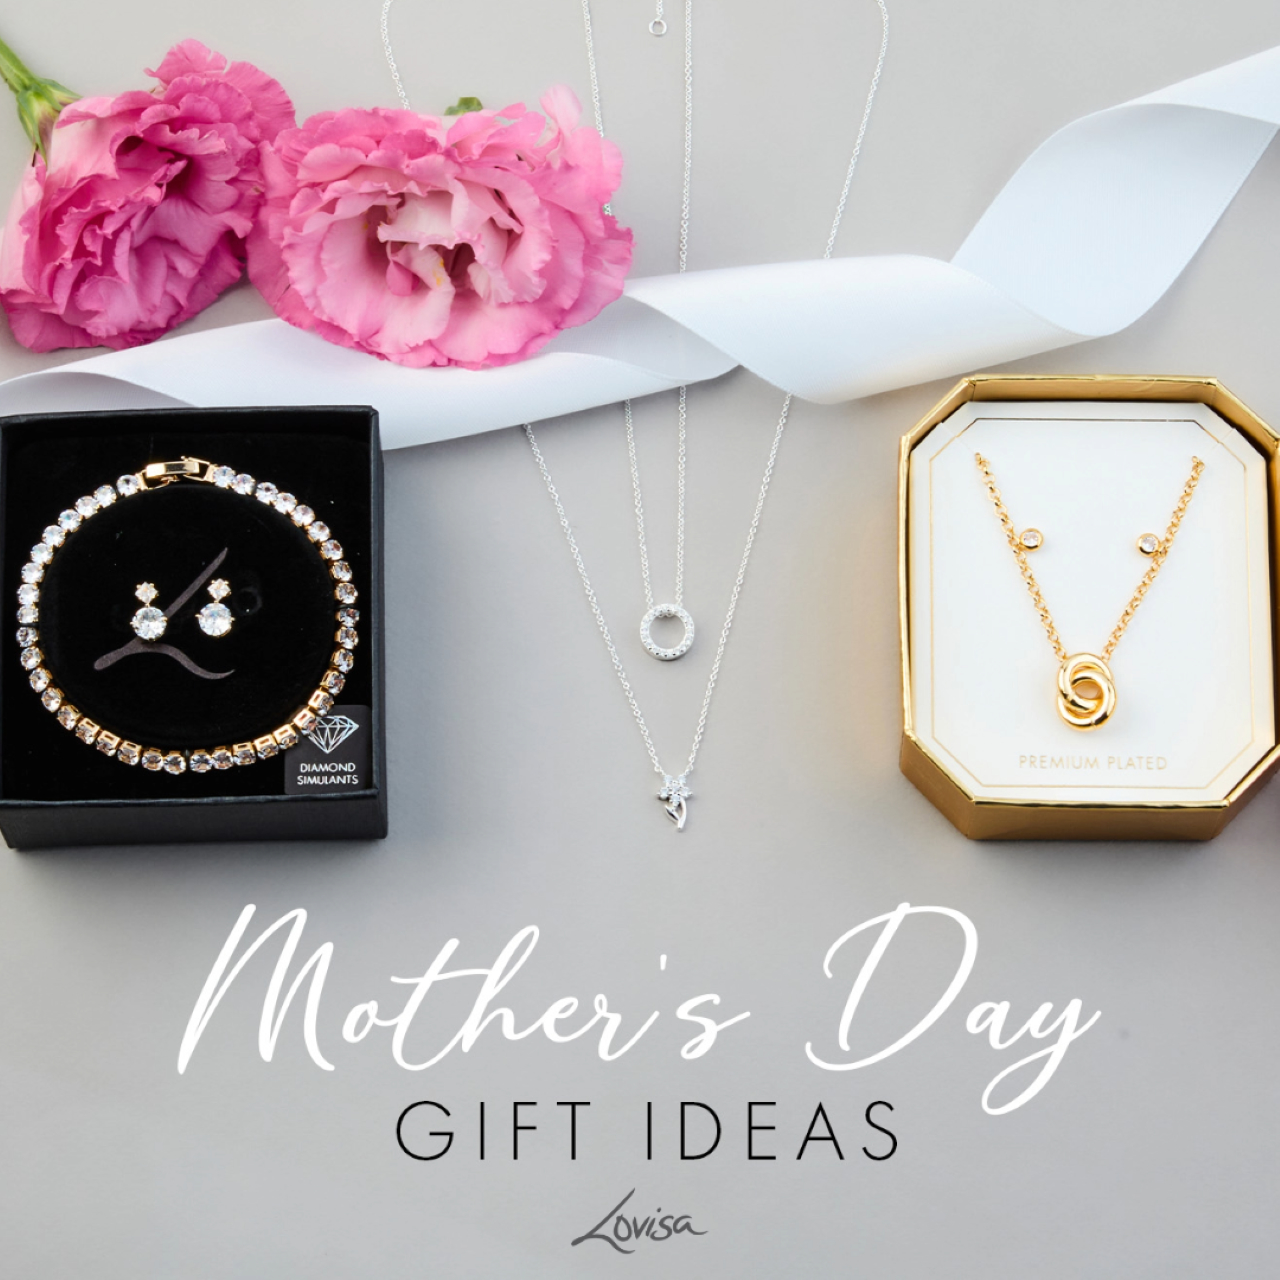 Lovisa Campaign 11 Mothers Day Free Gift with Purchase EN 1280x1280 1